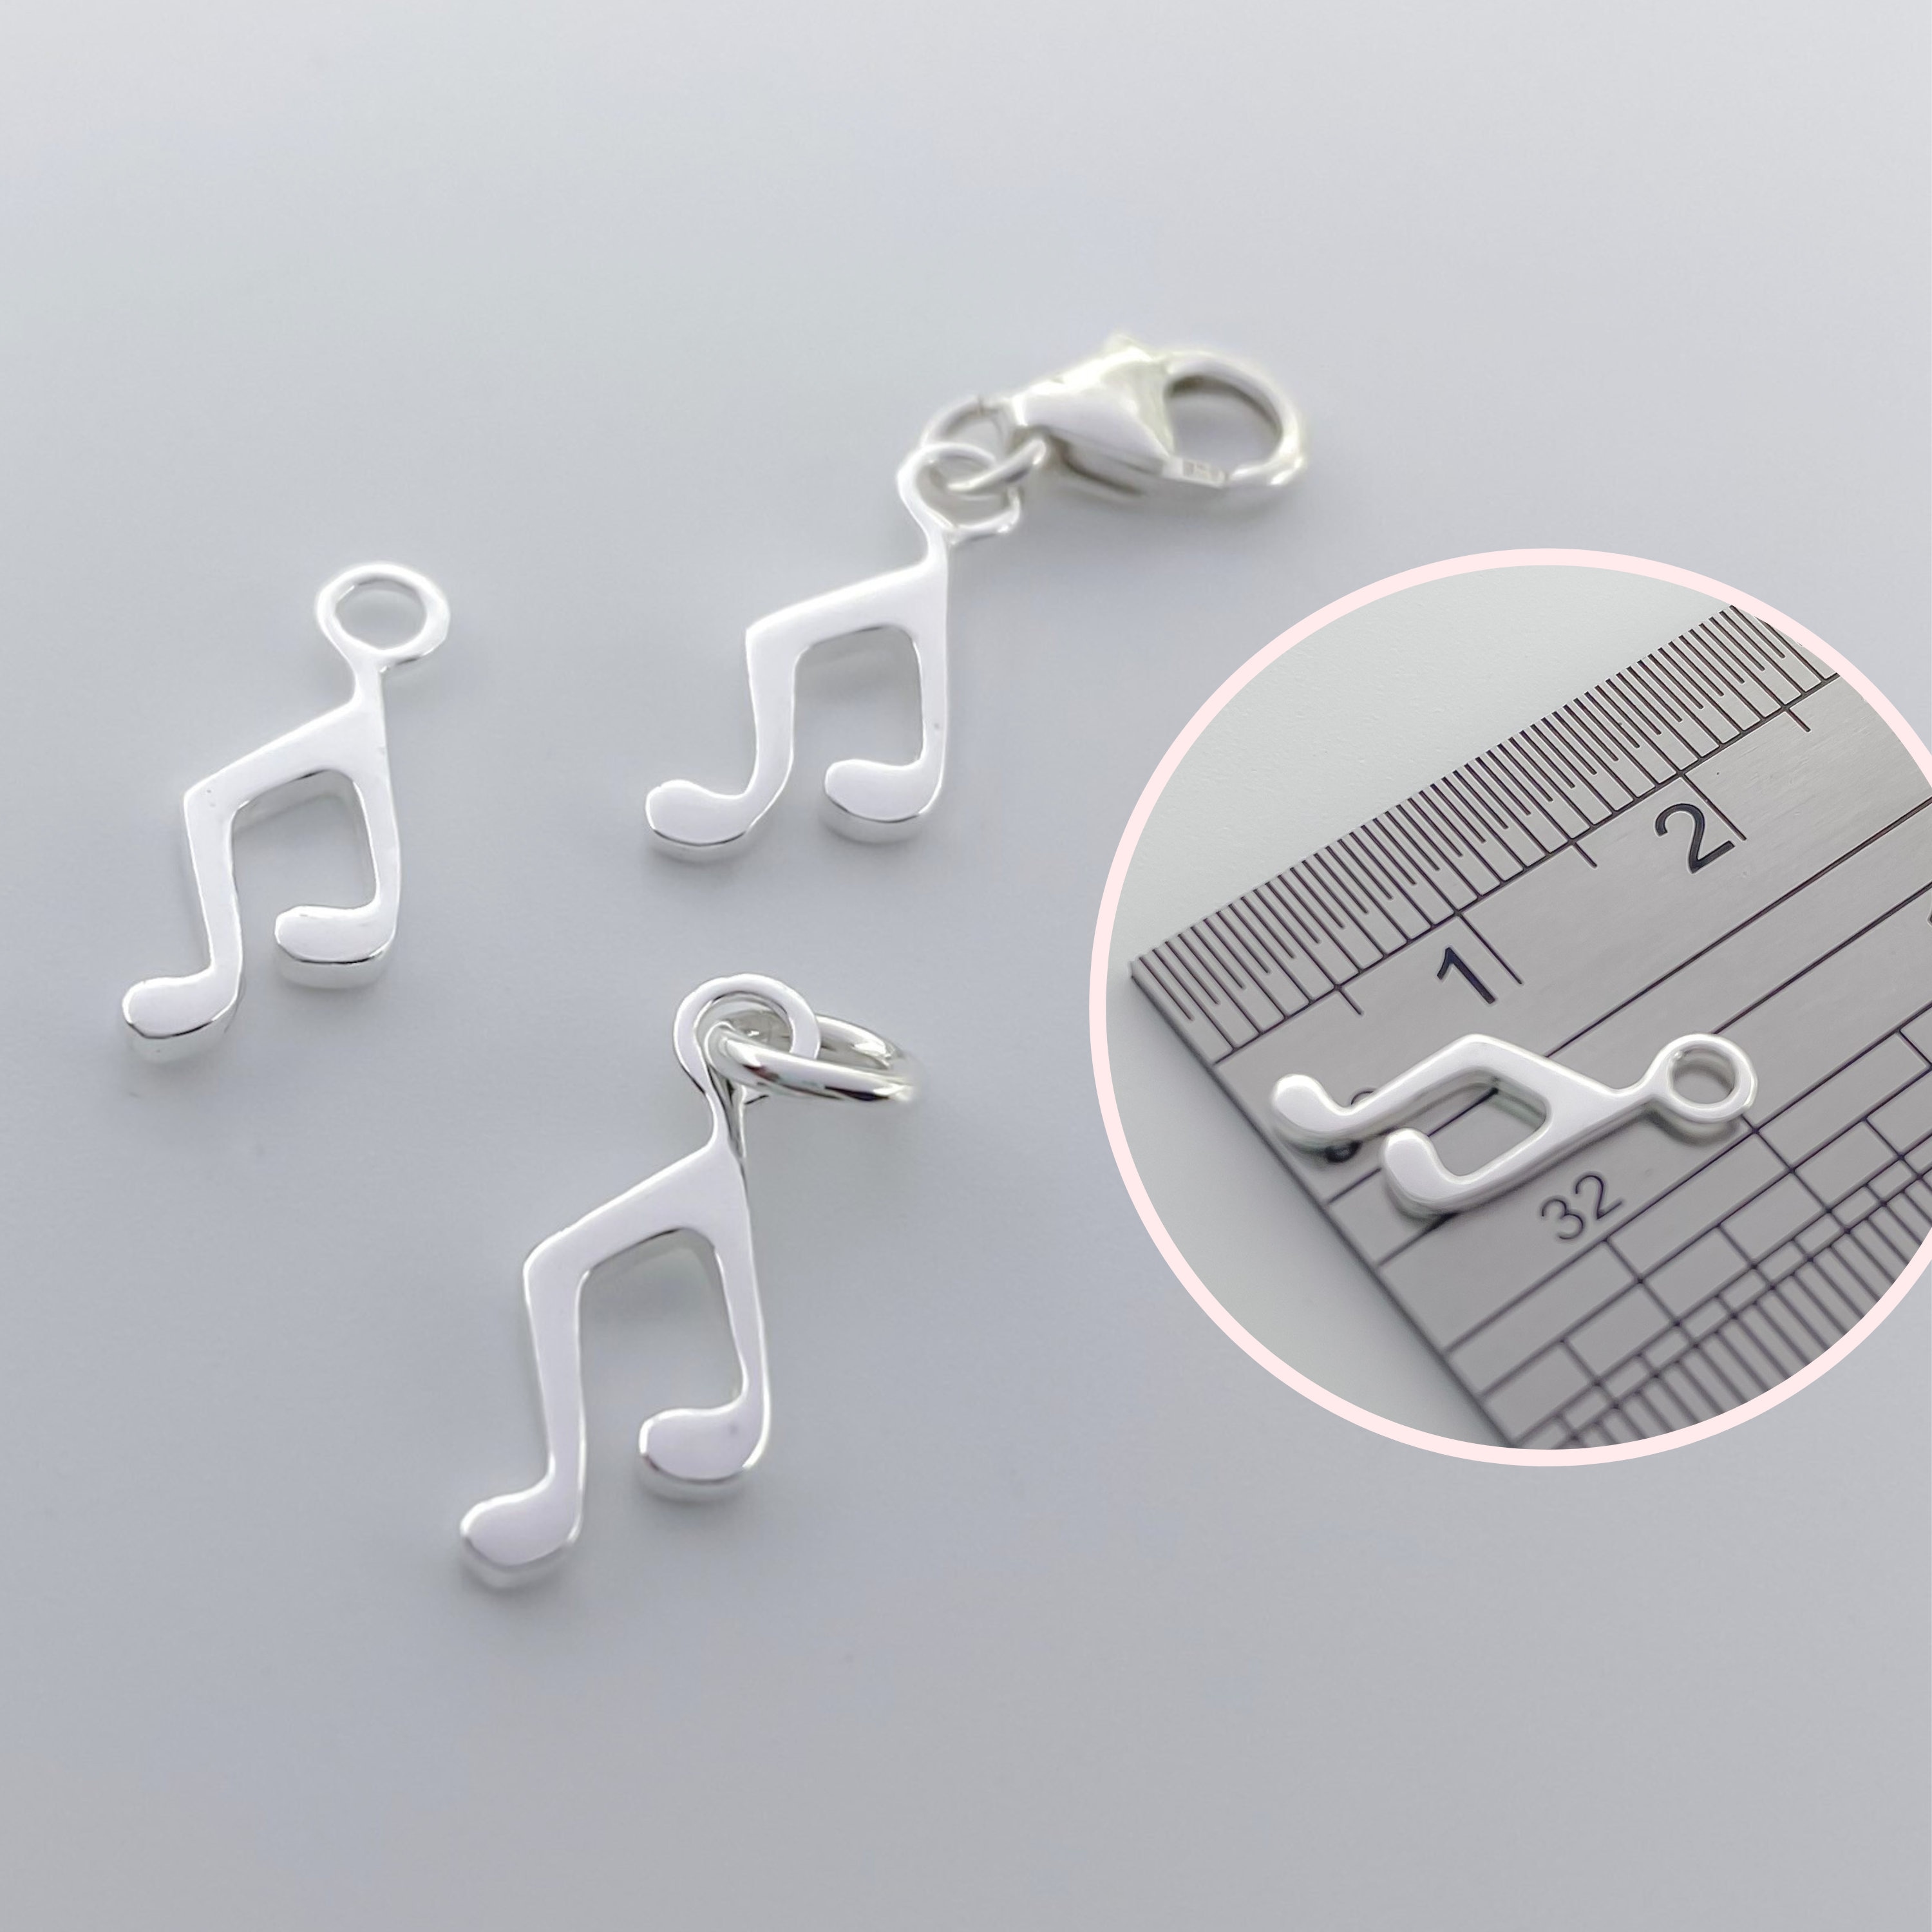 10 X Music Note Metal Charms, Beam Notes Metal Charms, Jewellery Making,  Craft Supplies, Silver Charms, Charms, Jewellery Findings, Pendant 